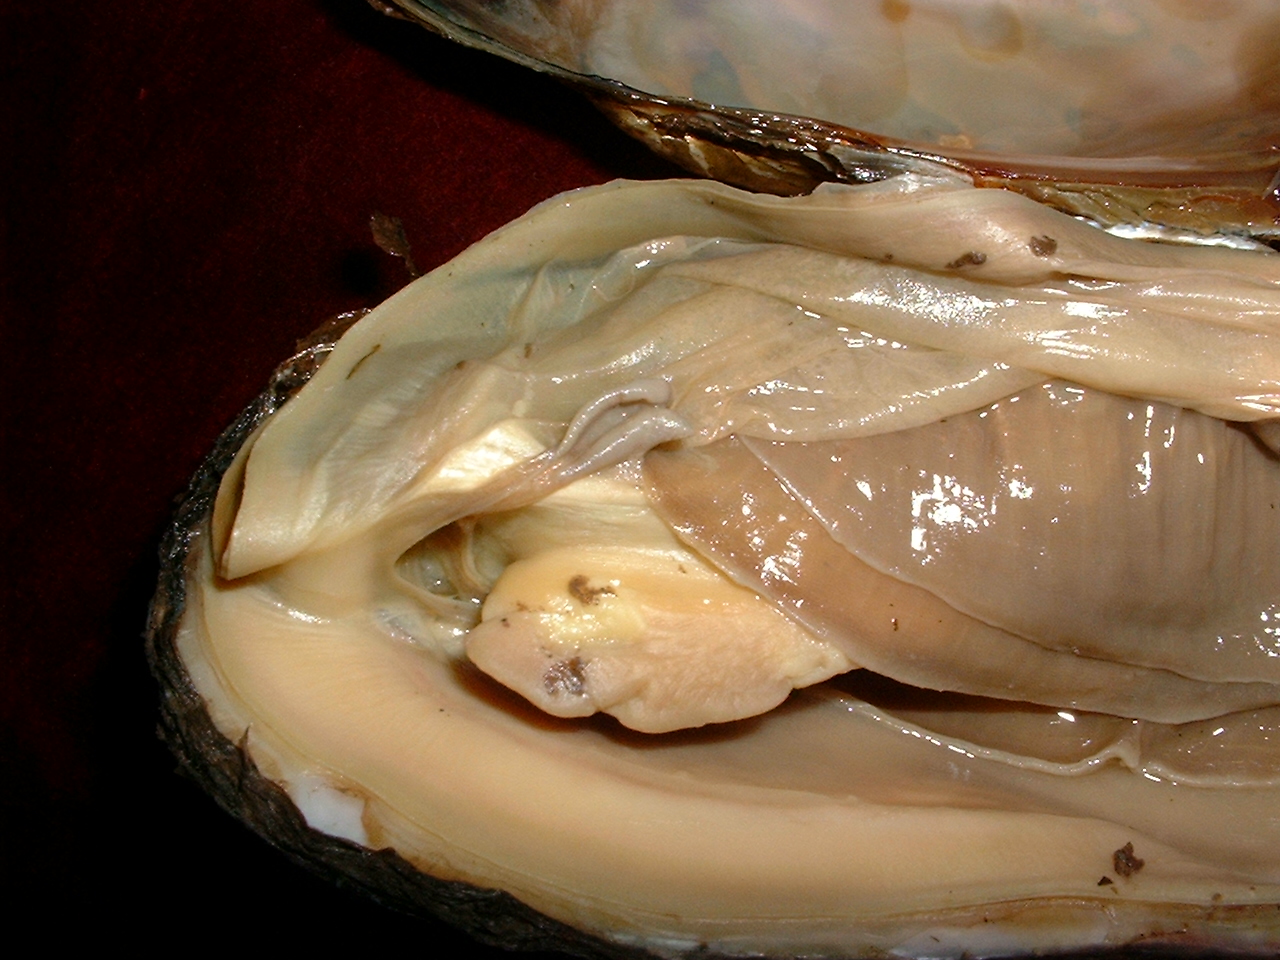 CLAM IMAGES: Biology 201